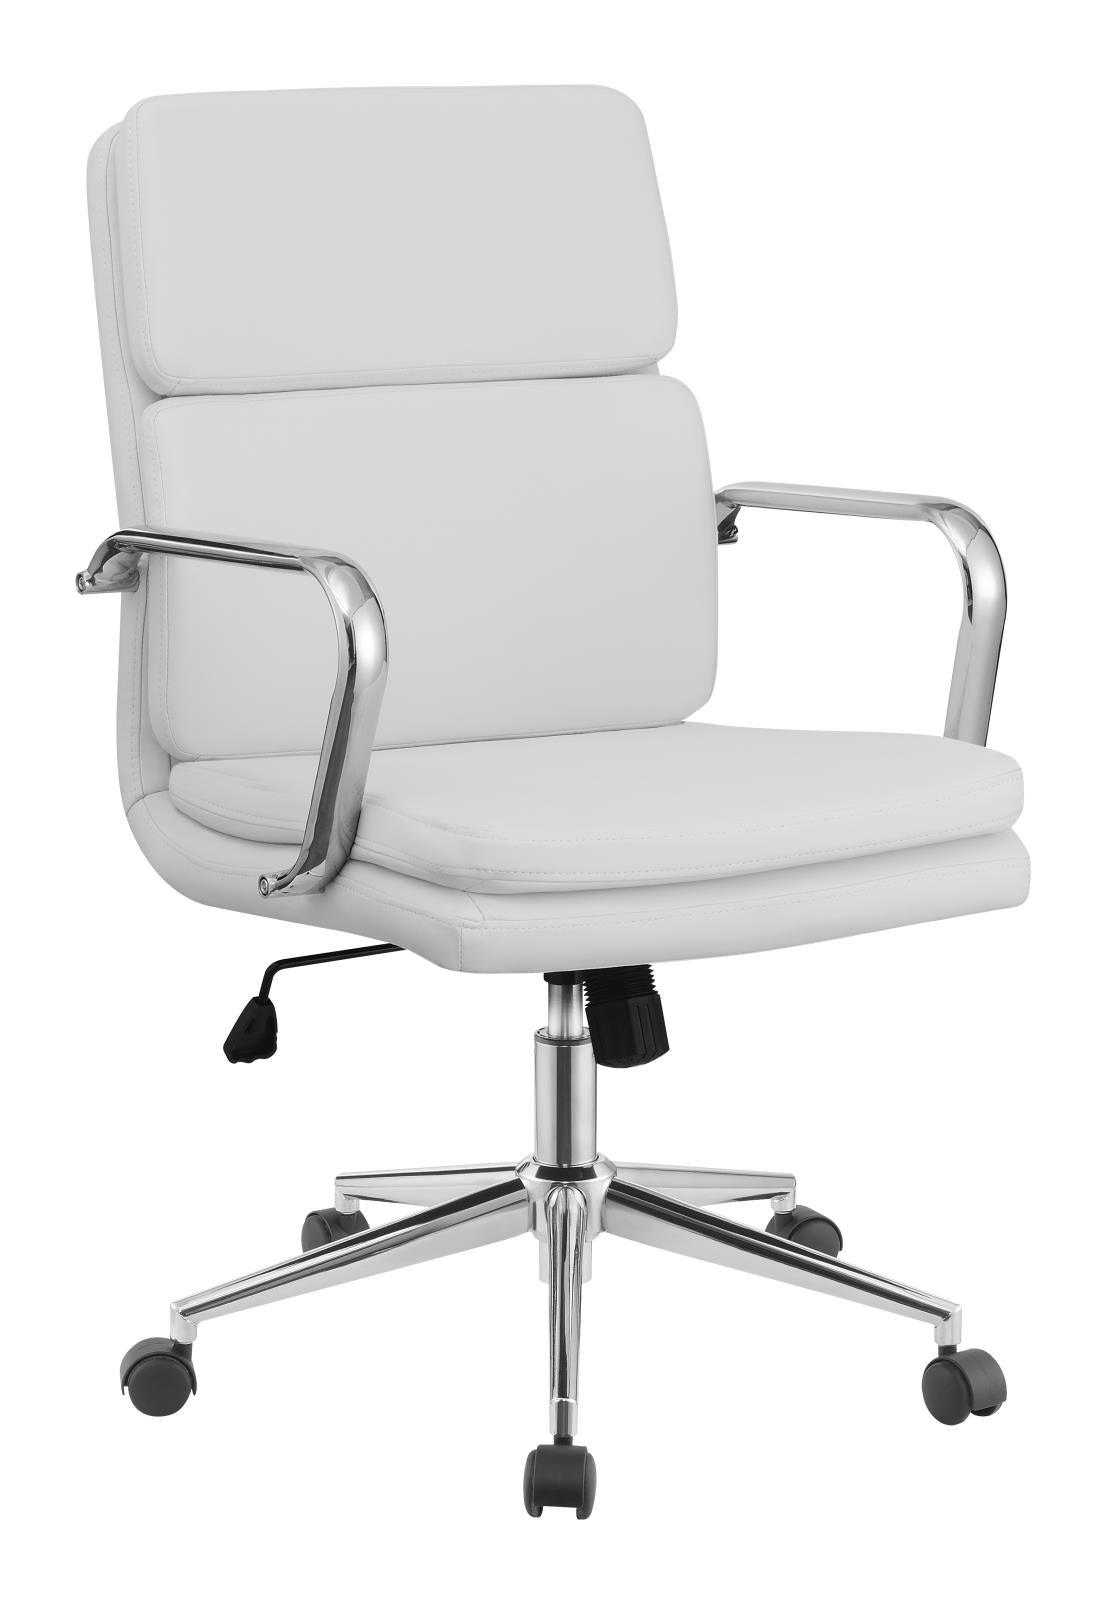 White Upholstered Office Chair 801767 - Ella Furniture